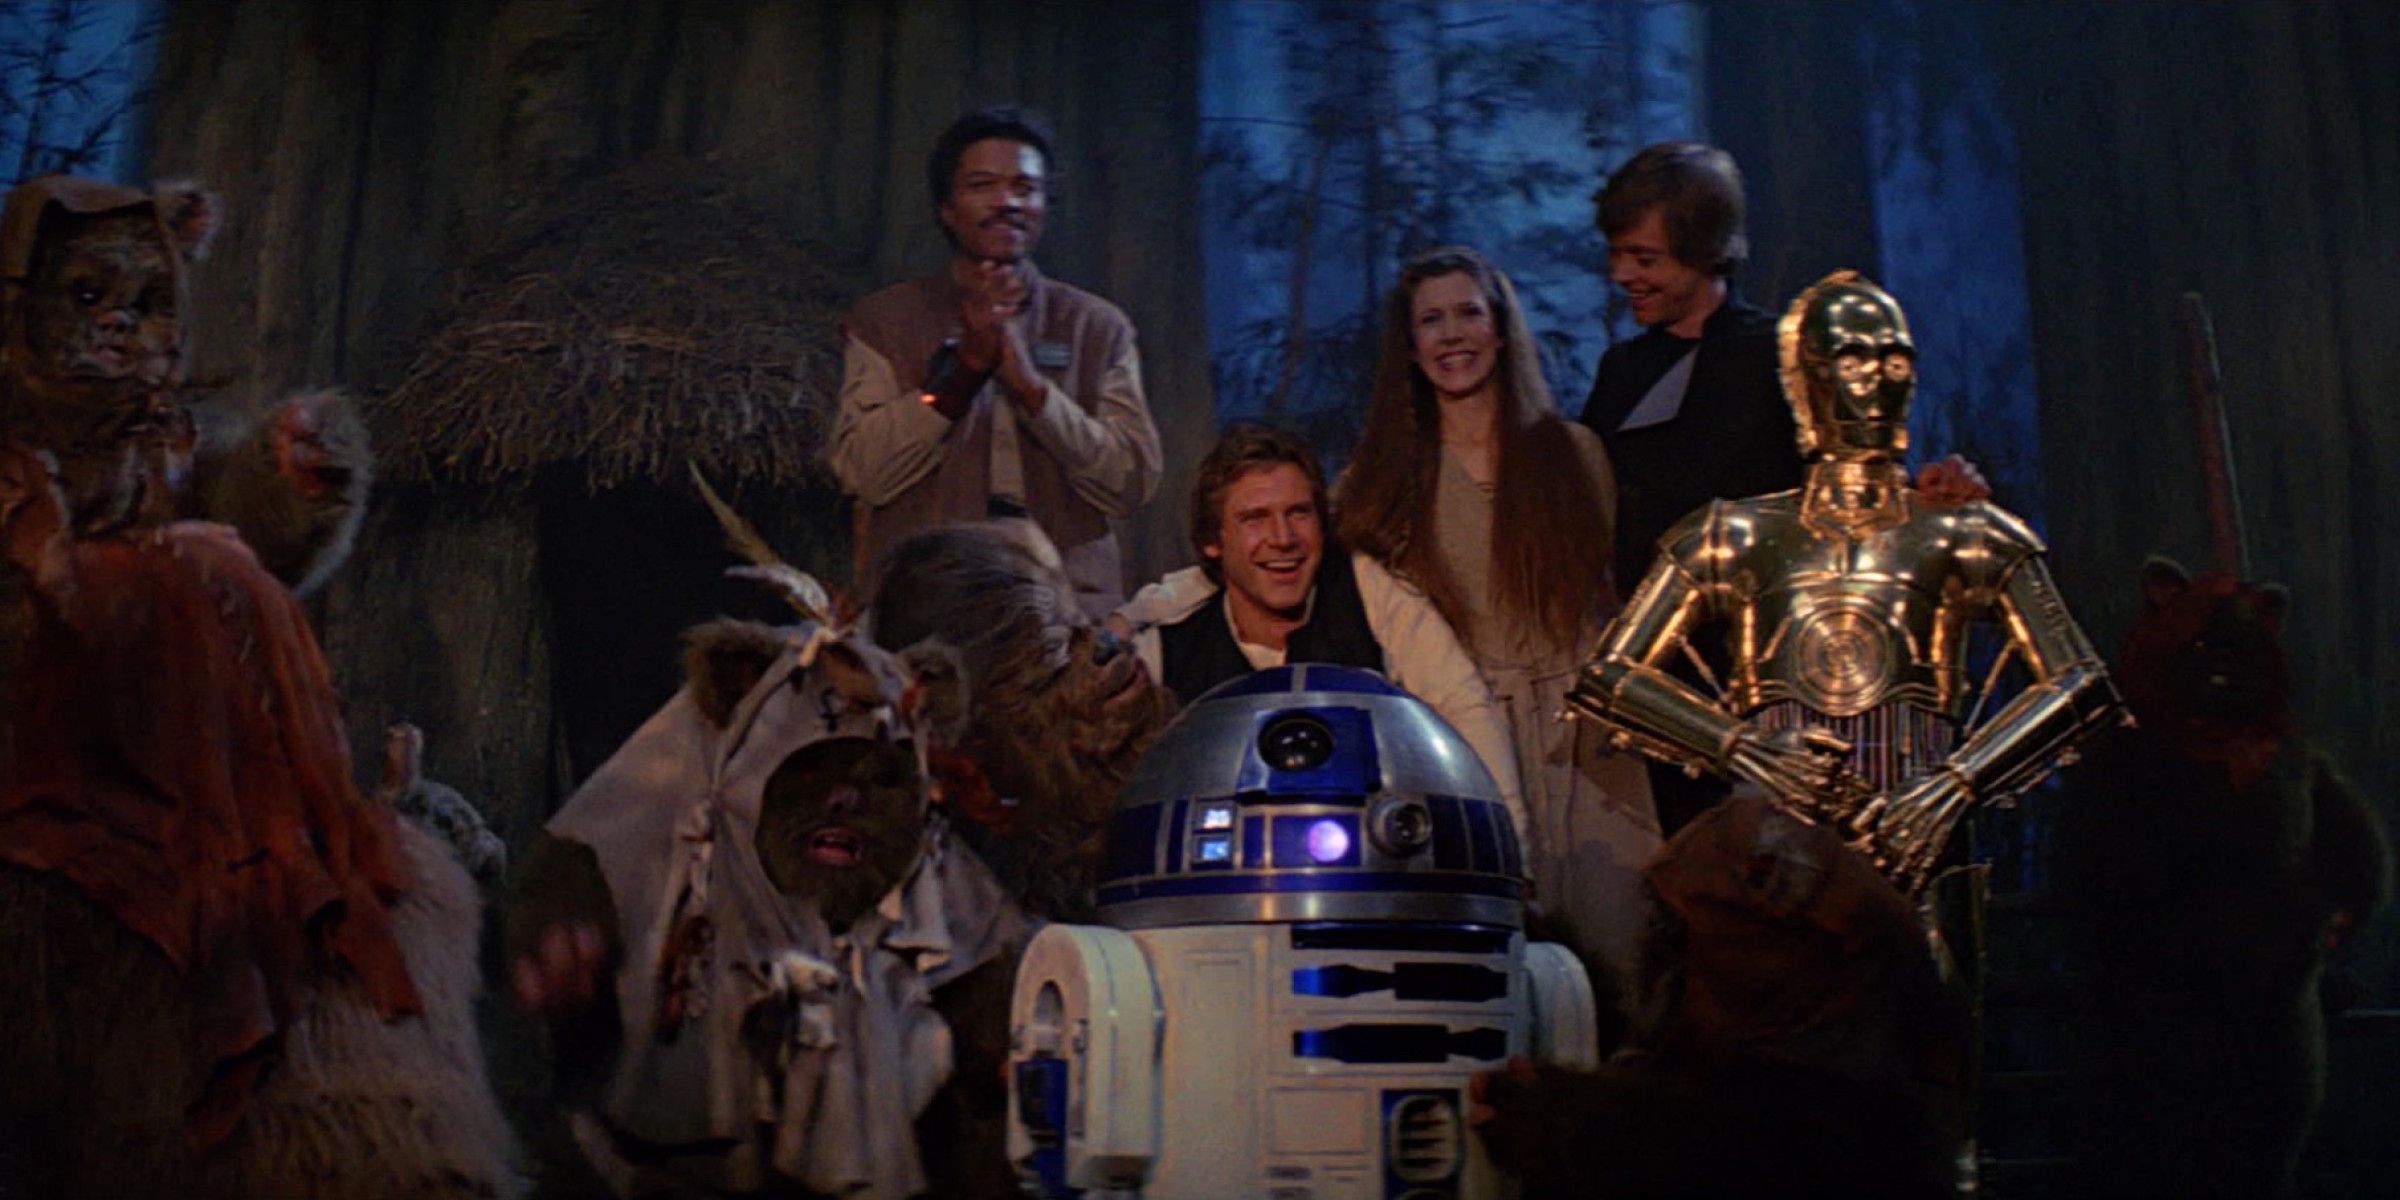 The Rebels celebrating the defeat of the Empire in Return of The Jedi